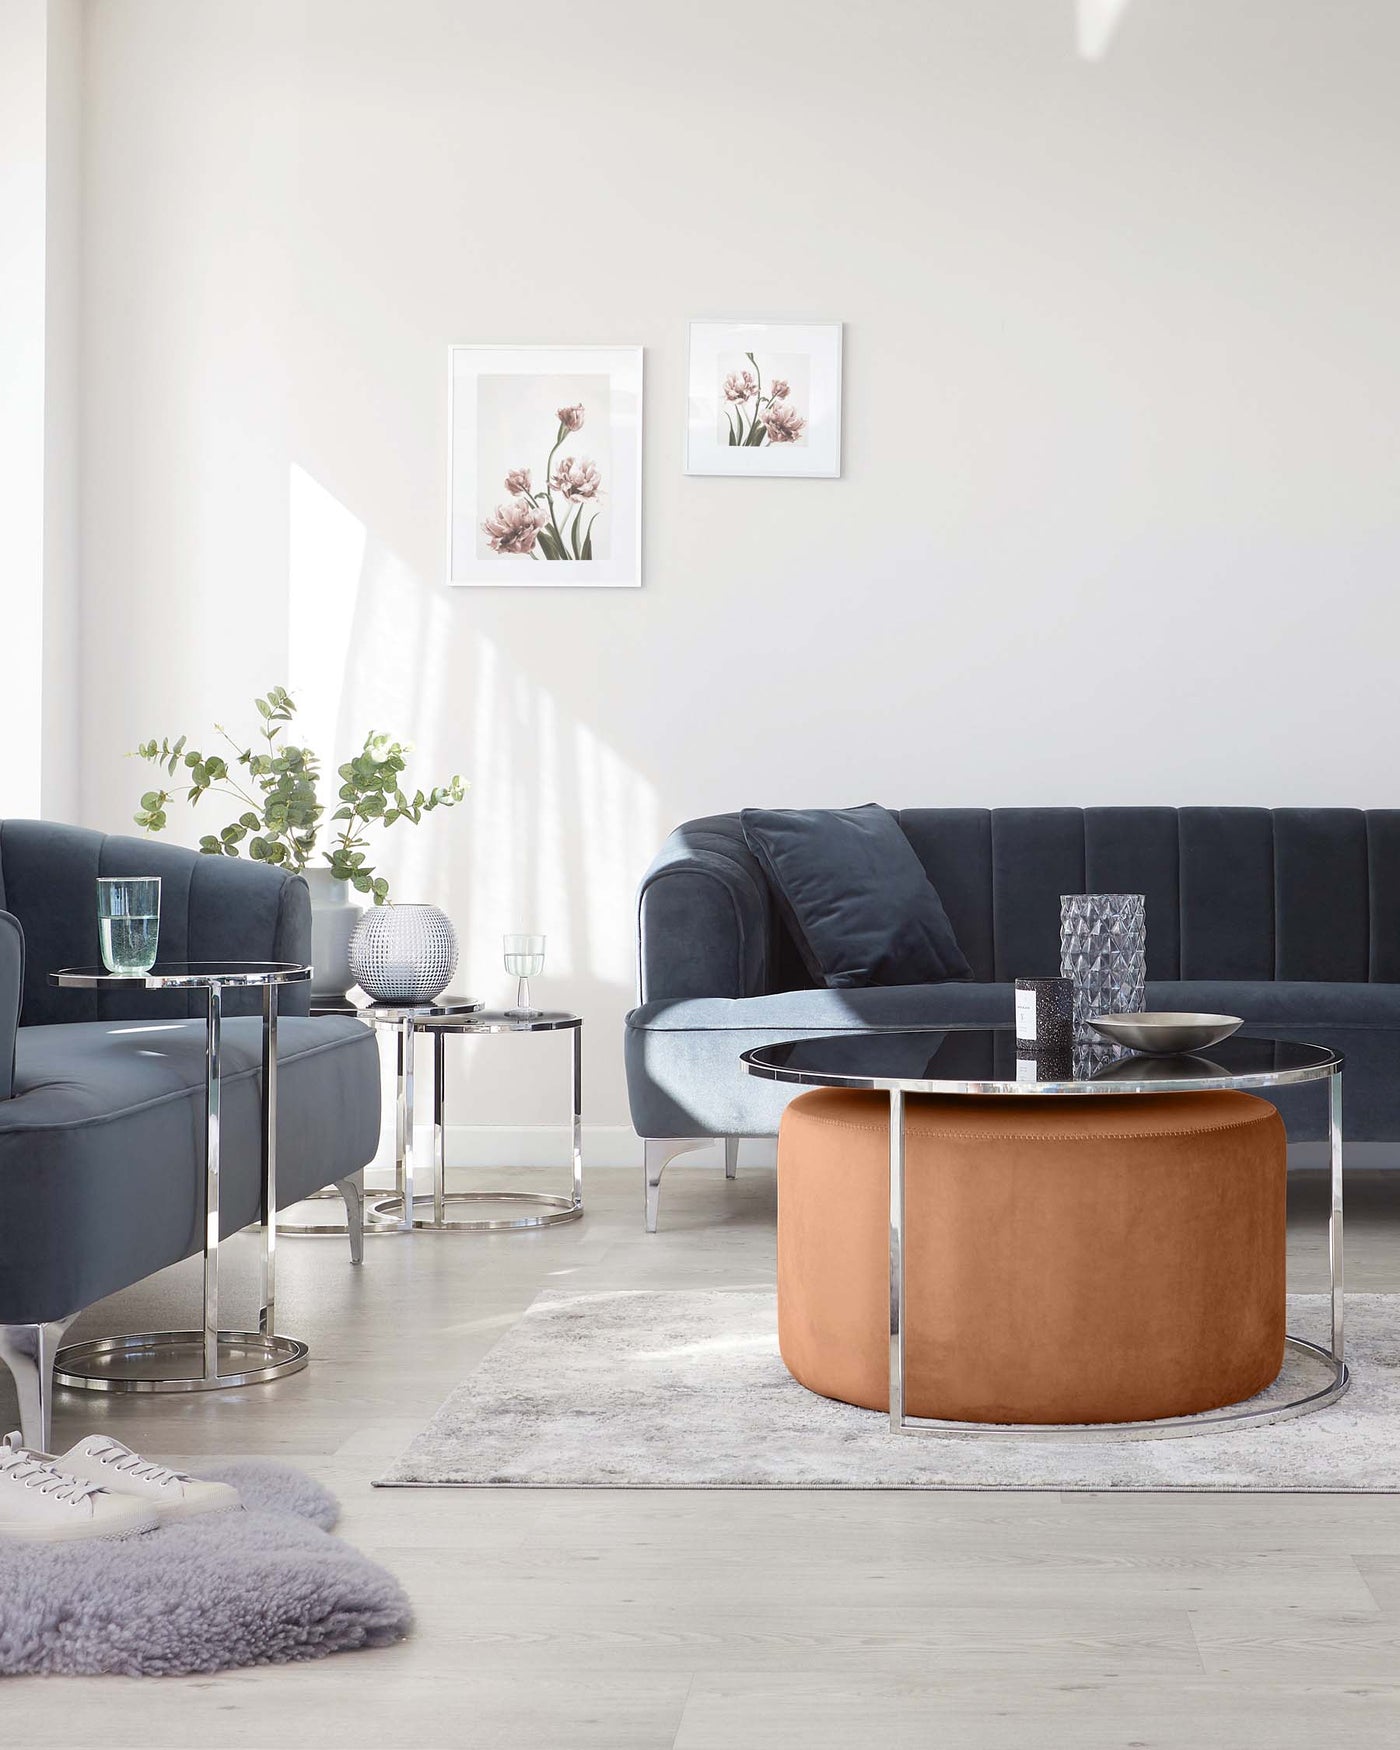 Modern living room arrangement featuring a dark blue velvet sectional sofa with tufted backrest, a circular caramel-coloured ottoman with a glass table top centrepiece, two round side tables with glass tops and silver metallic bases, a plush grey area rug beneath the furniture, and decorative accent pieces including pillows, a vase, and a silver textured sphere.